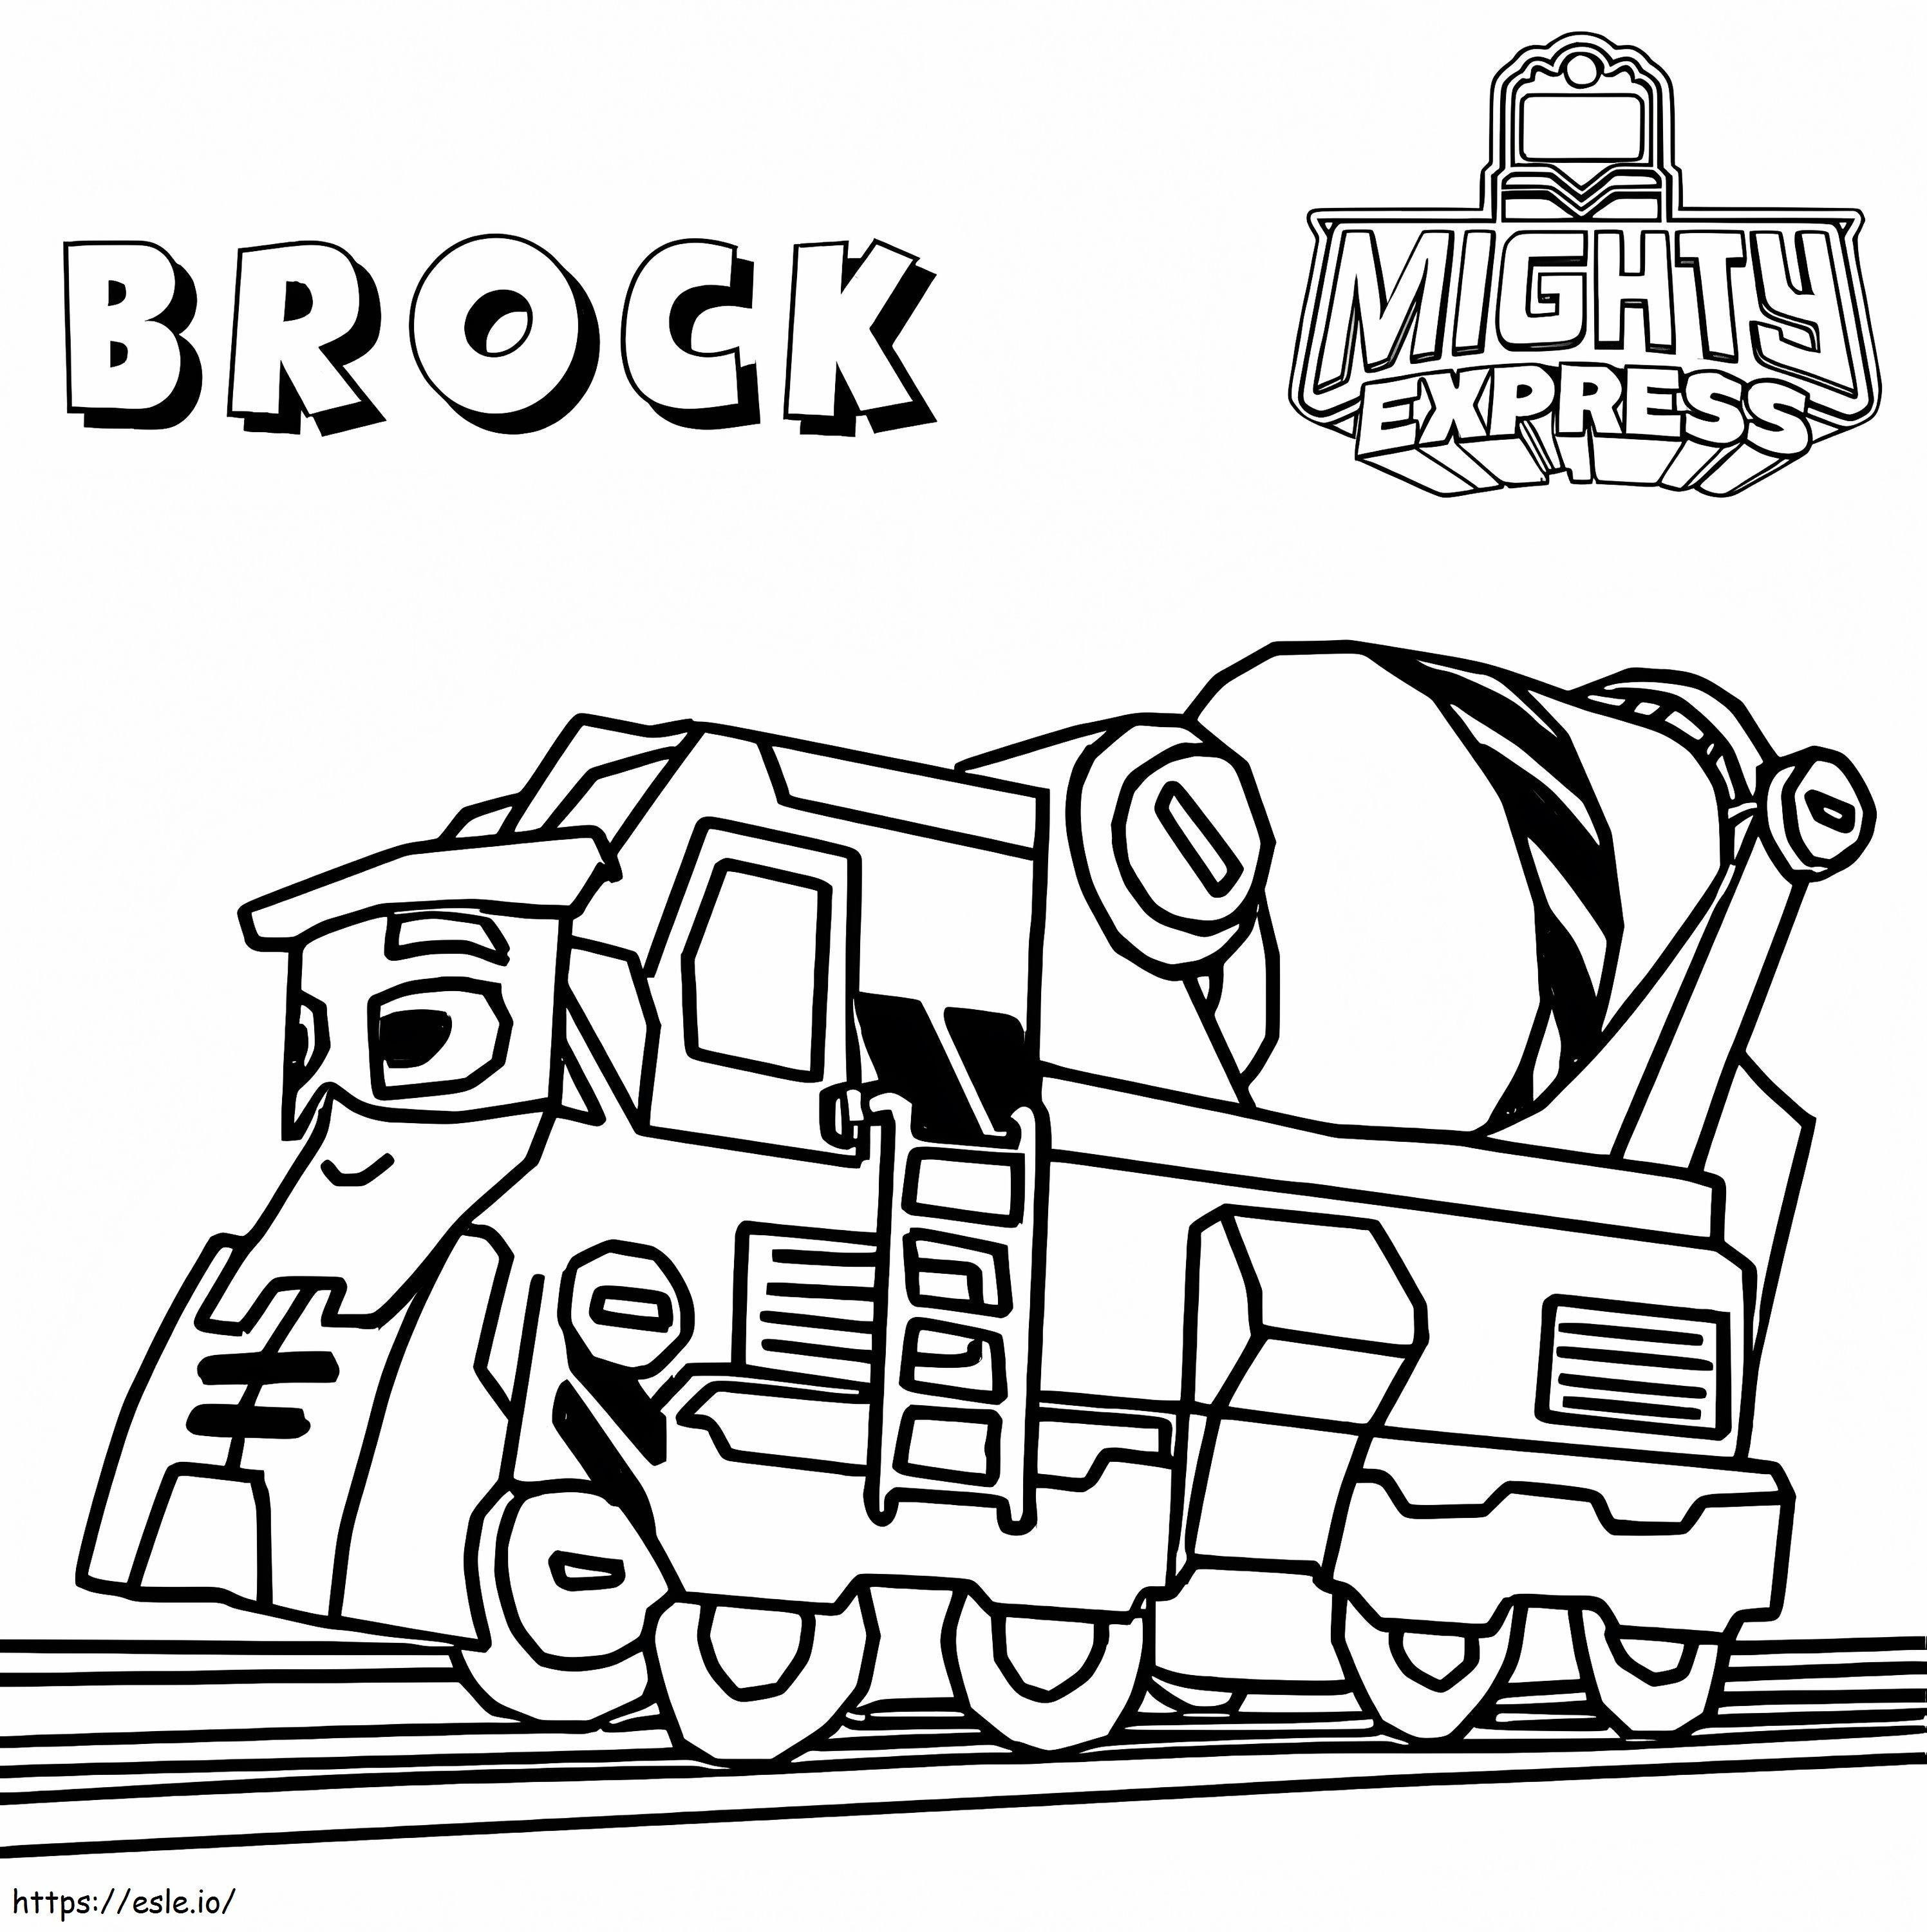 Builder Brock From Mighty Express coloring page